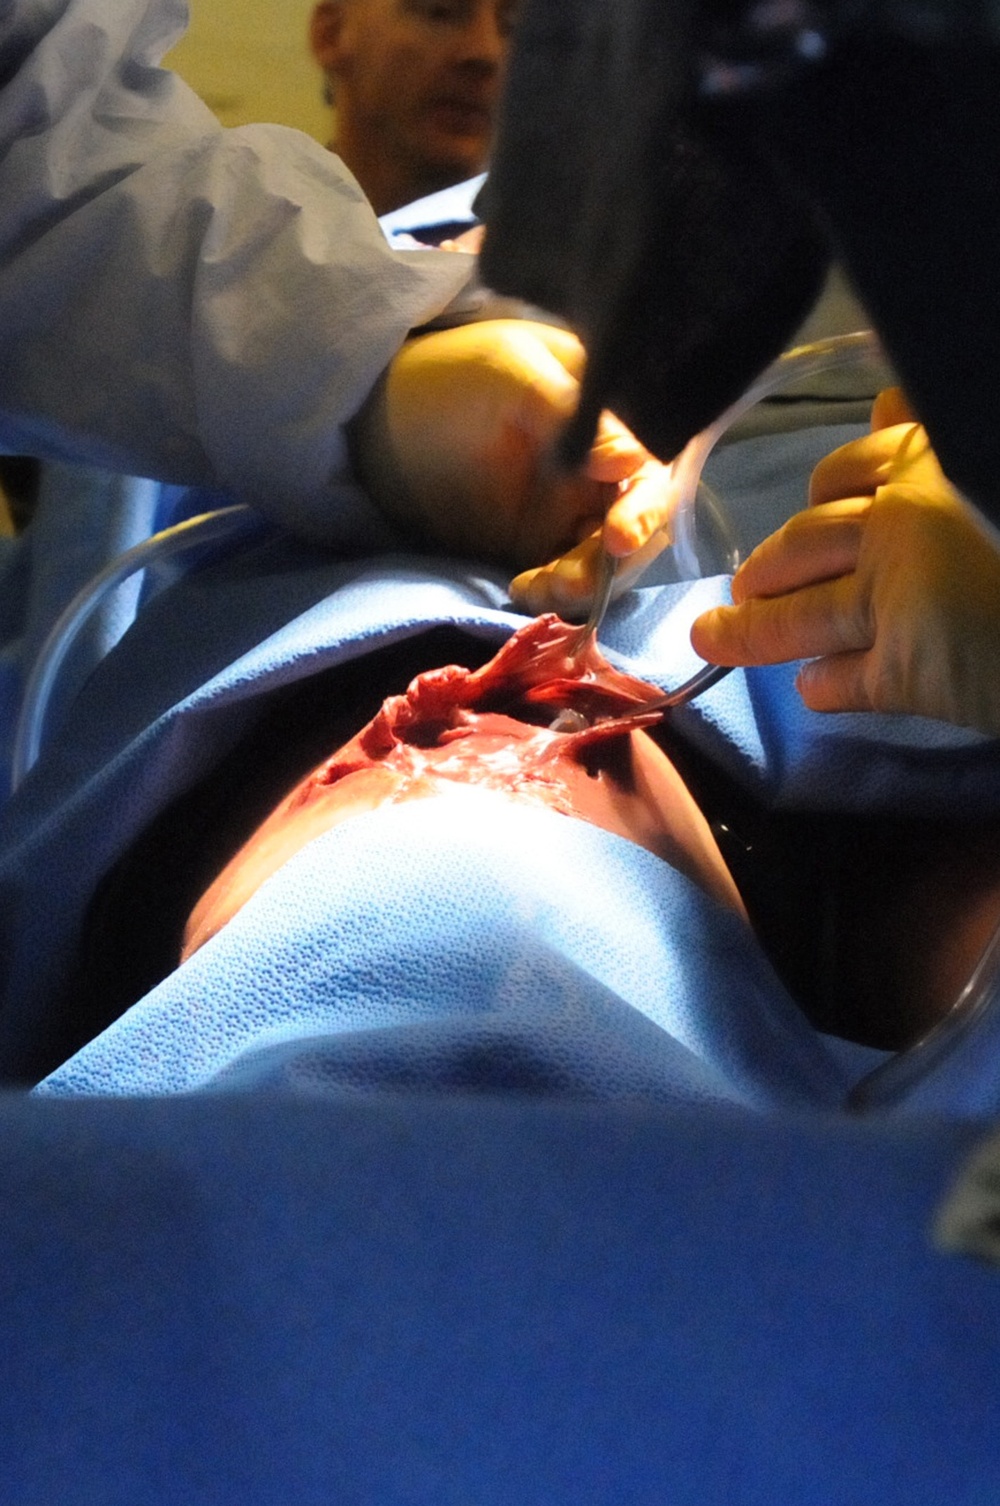 A cut above - Army Reserve surgical training